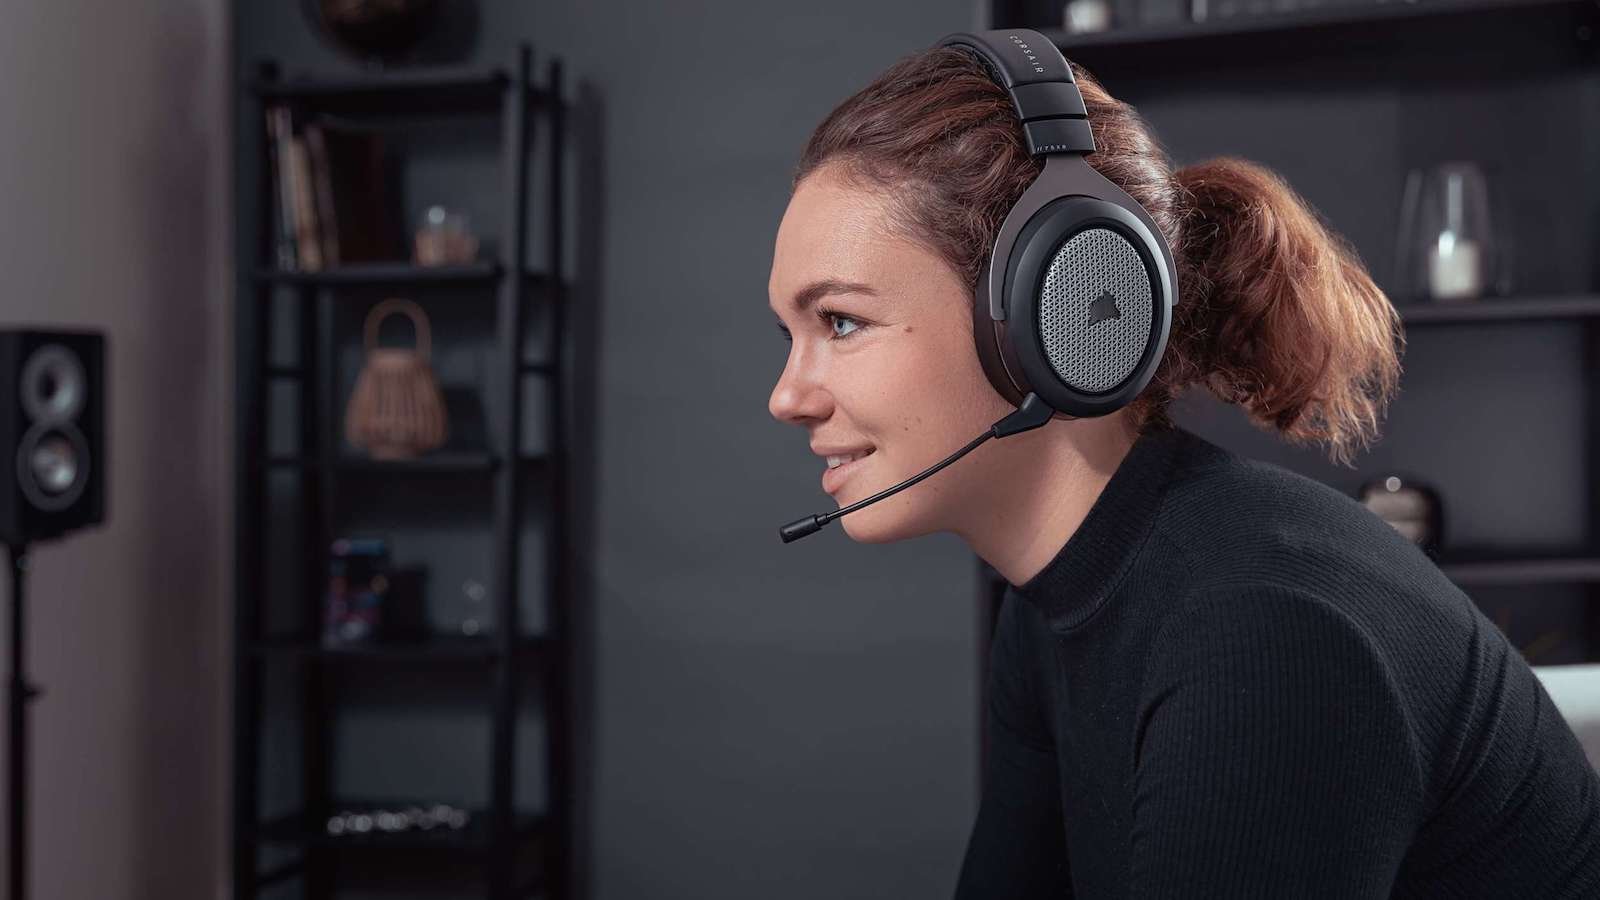 CORSAIR HS75 XB wireless gaming headset features high-quality Dolby Atmos audio